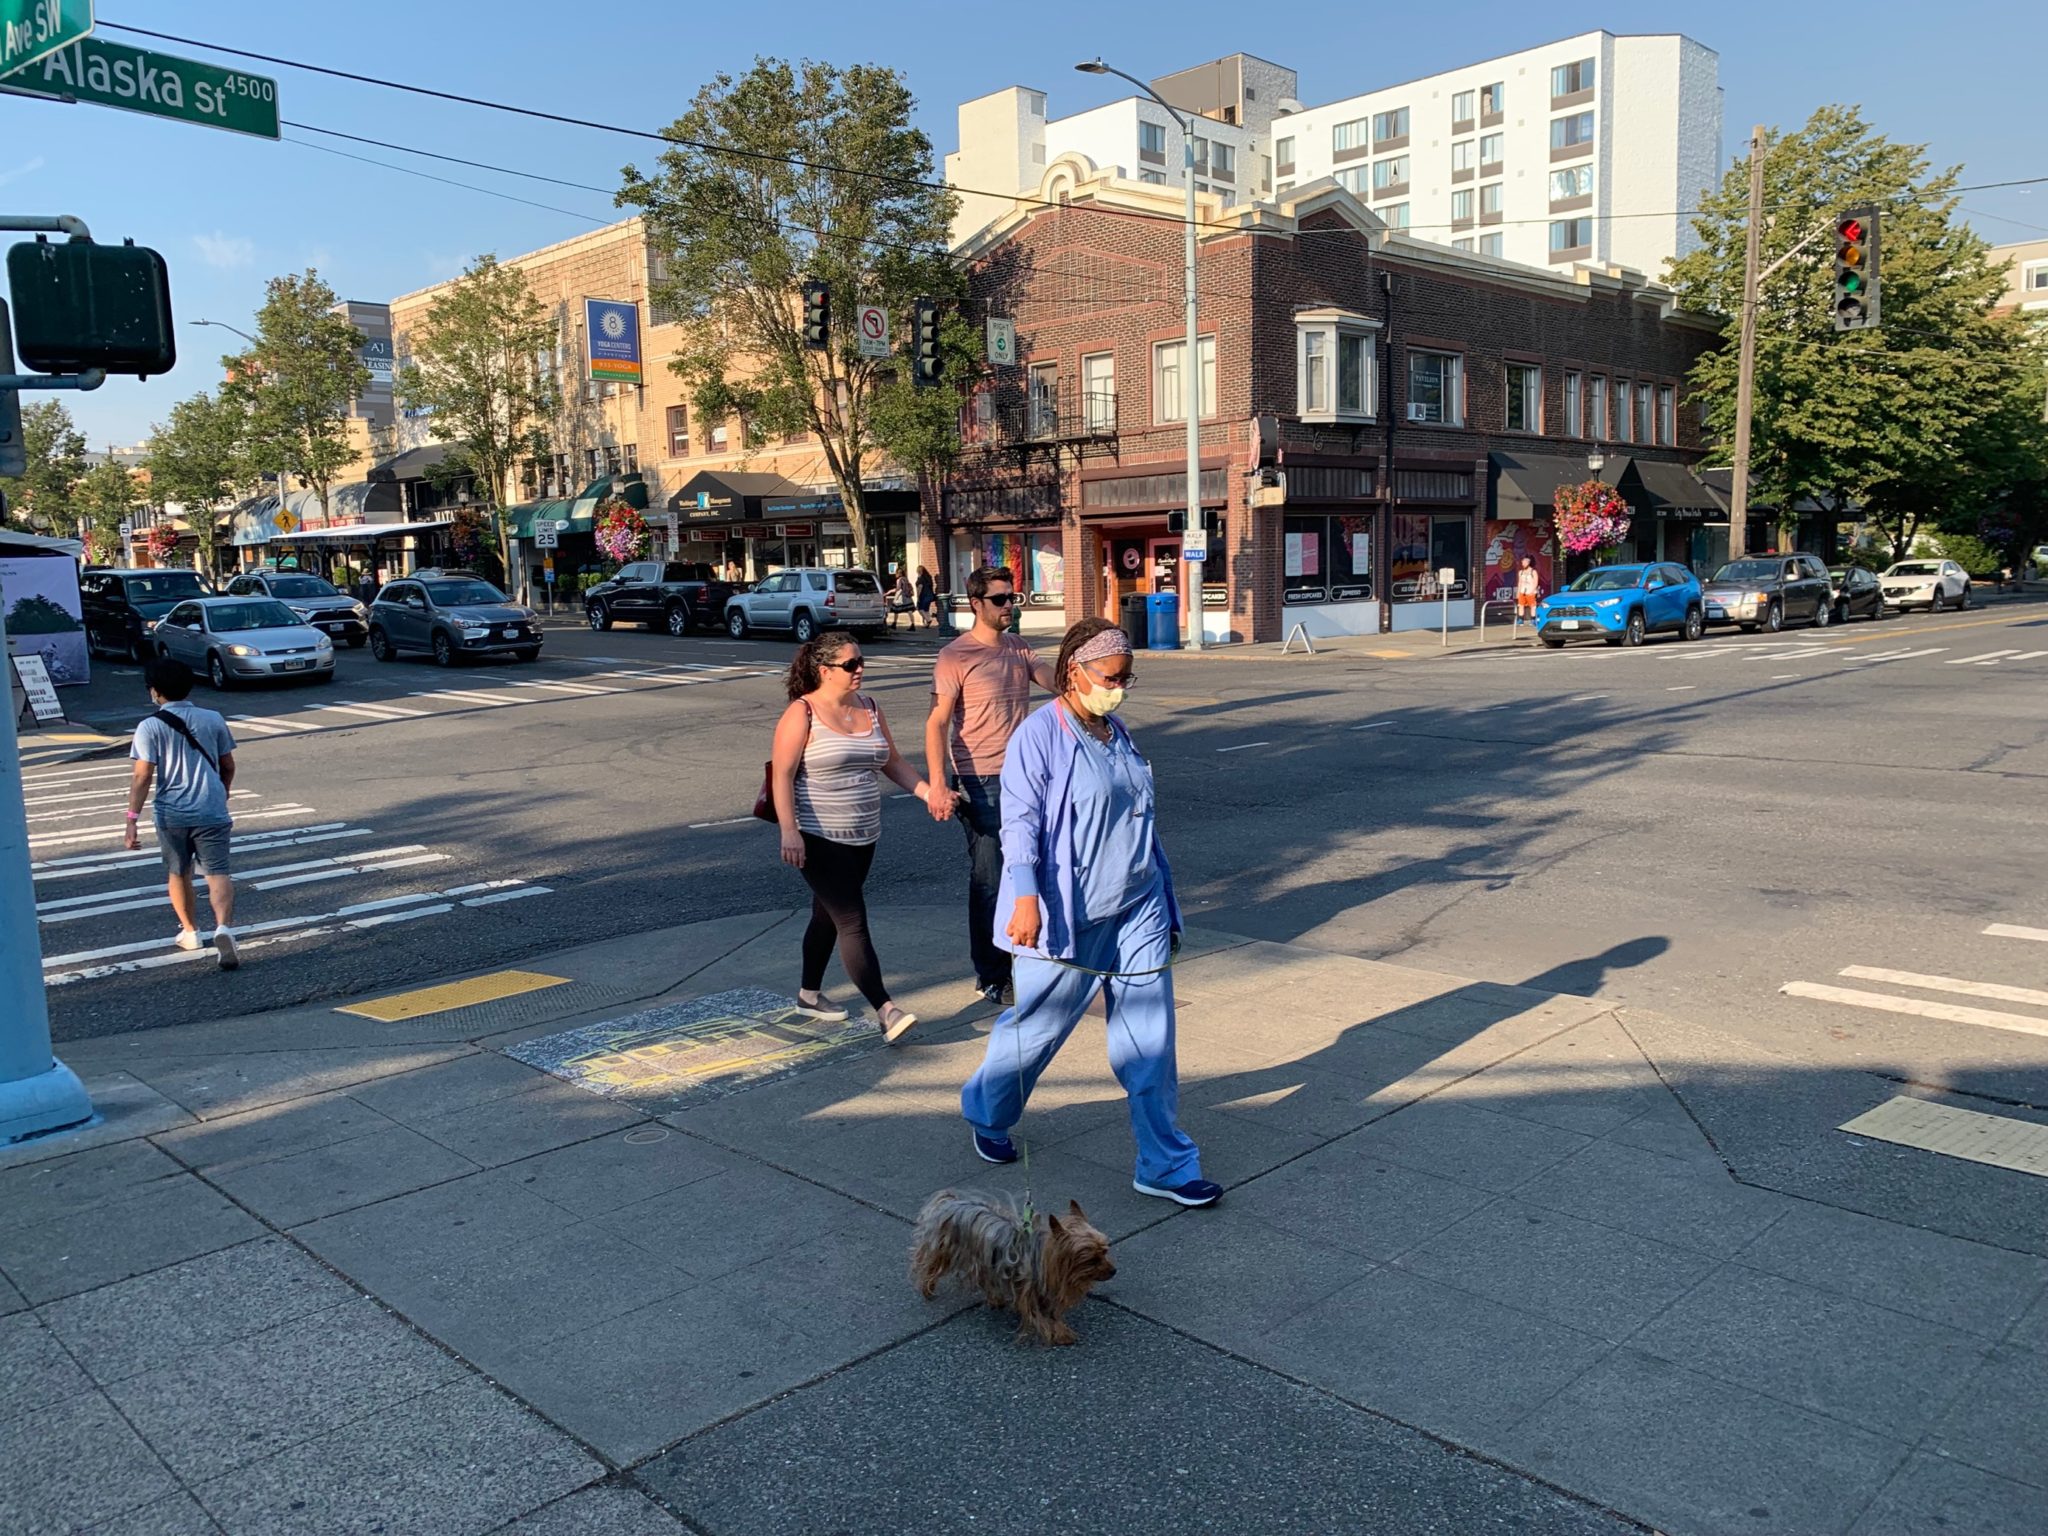 People walk through West Seattle along SW Alaska St. A woman wearing medical scrubs walks her dog while two people hold hands and a person walks across the street on the left side. Cars and buildings are visible in the background.